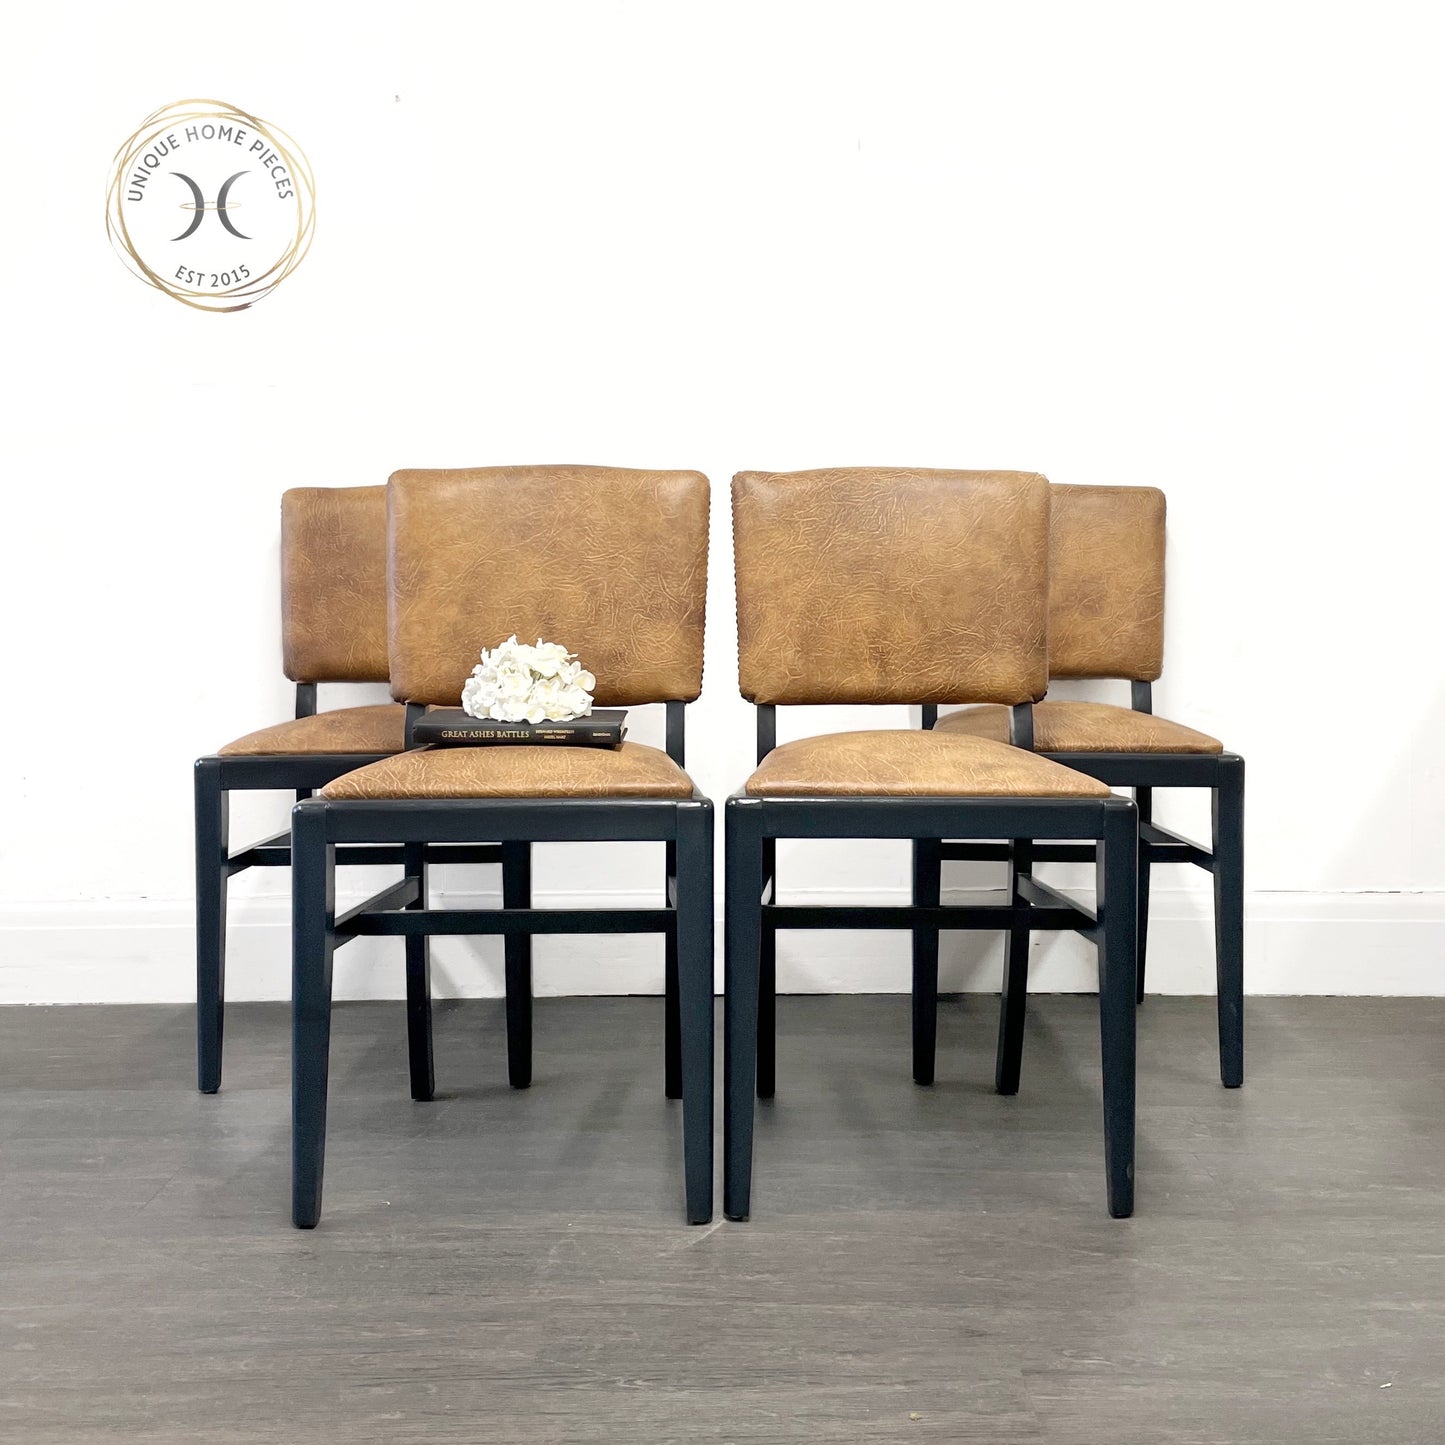 set of 4 black 1950,s  dining chairs by Beautility, upholstered by a professional upholstery  in a faux leather material in a honey tone. these chairs designswill fit perfectly in any dining room while adding a touch of luxury.